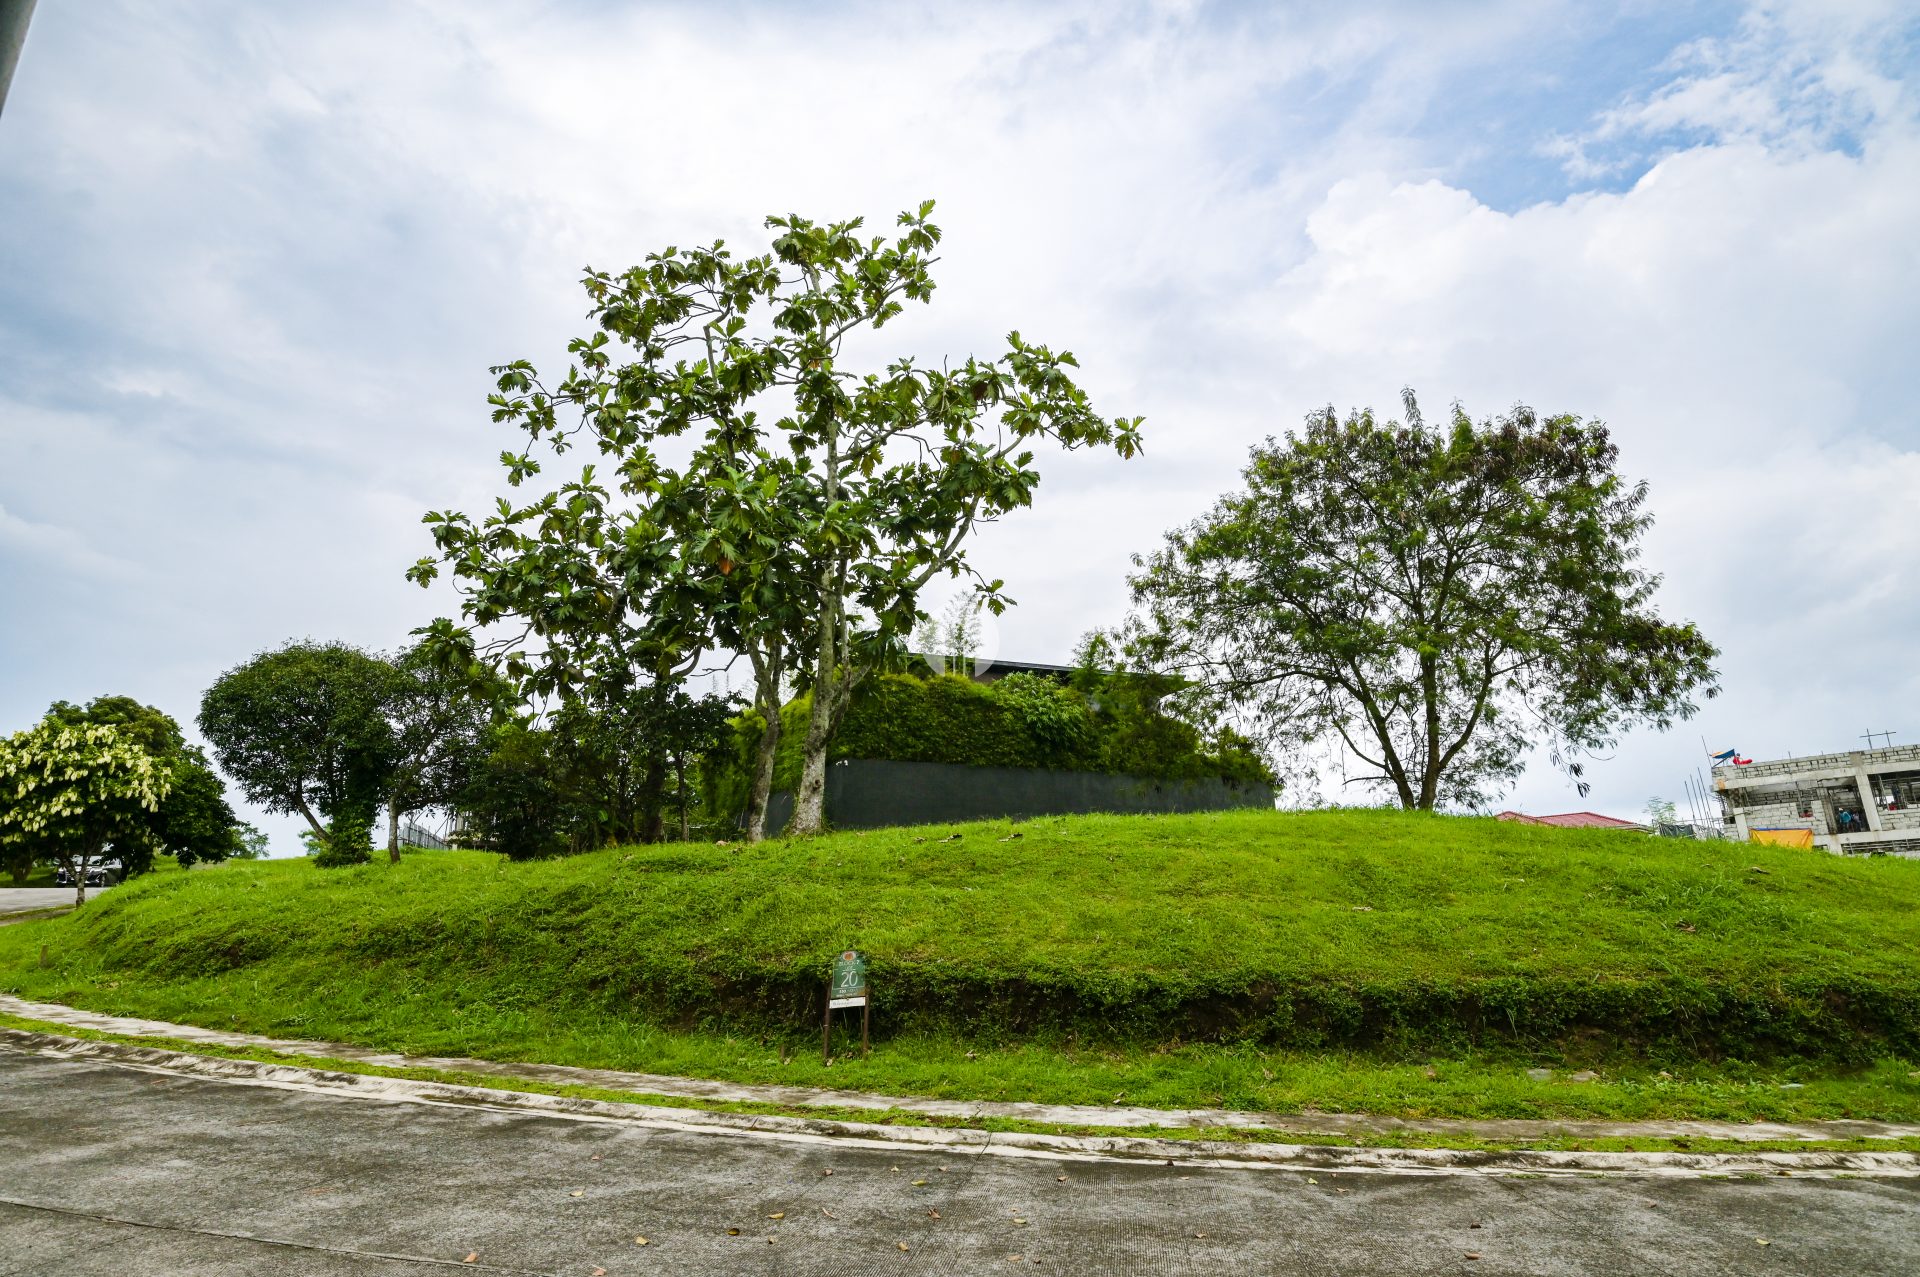 Corner Residential Lots in Ayala Westgrove Heights for Sale - near Tagaytay | Golden Sphere Realty